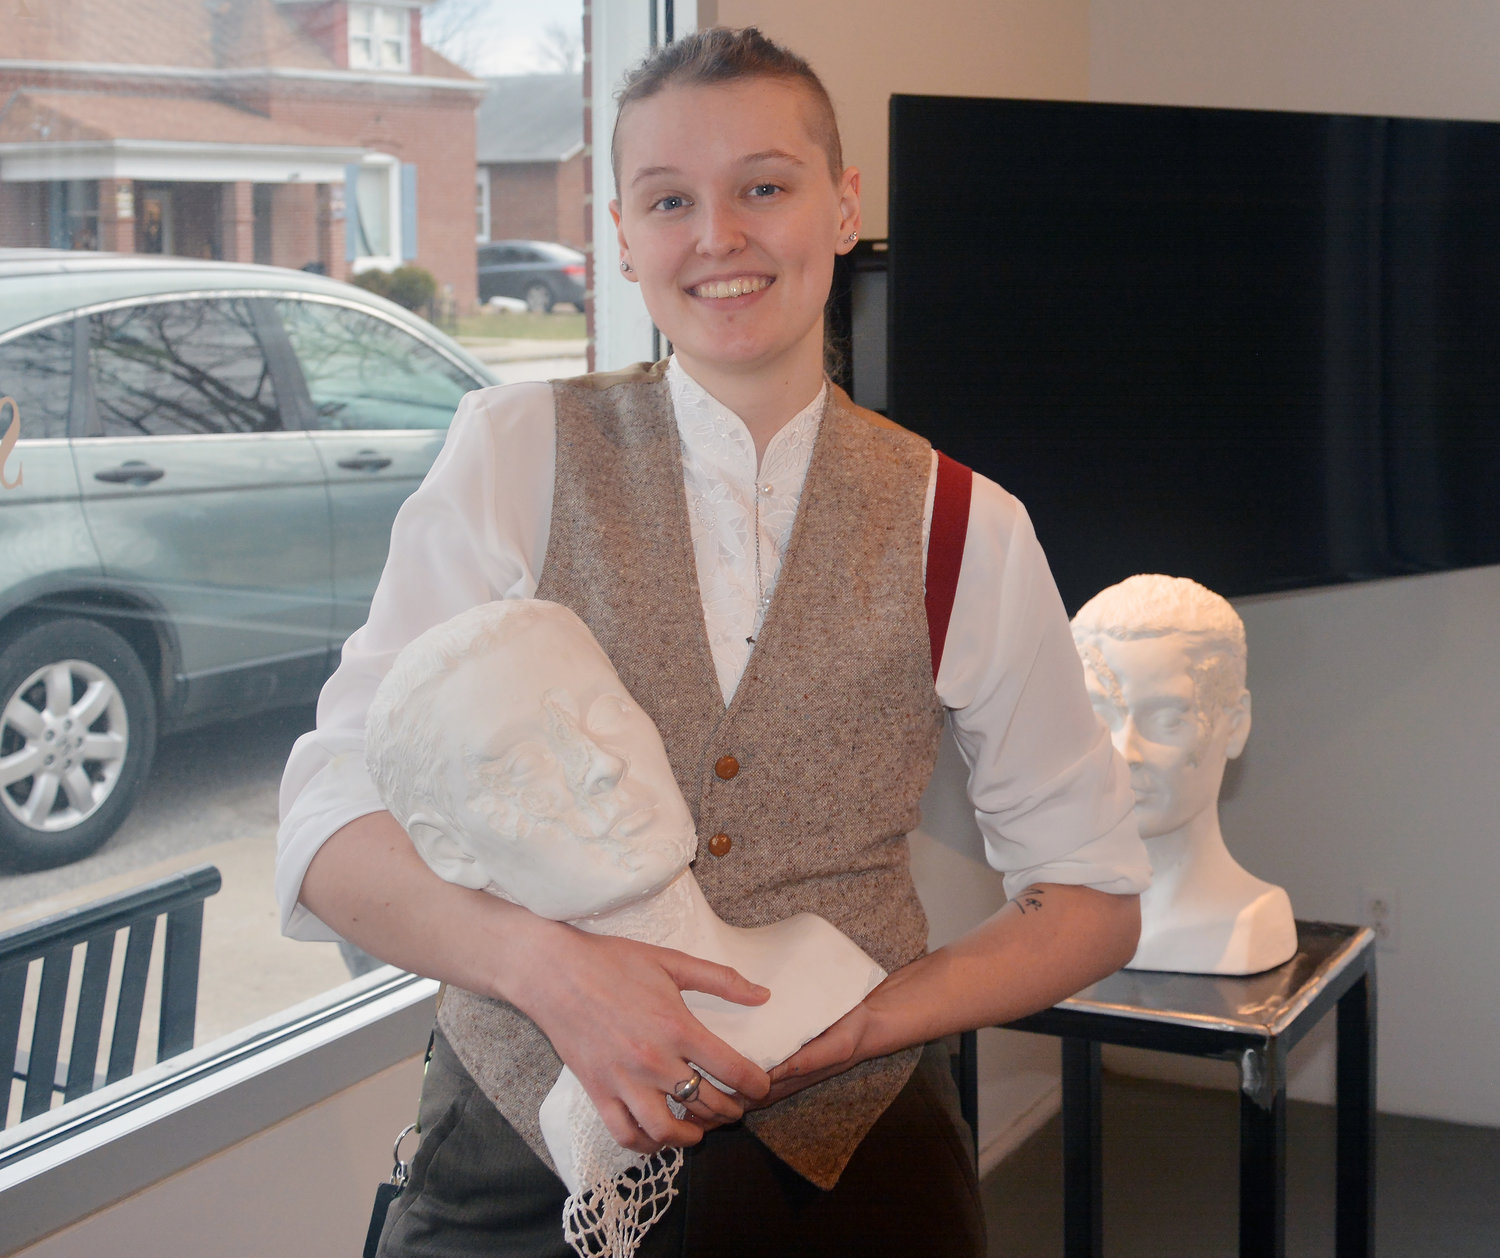 Artist Maggie Adams poses with a plaster sculpt of her head at the Osage Arts Community Art Center. Adams finished an OAC residency last fall.